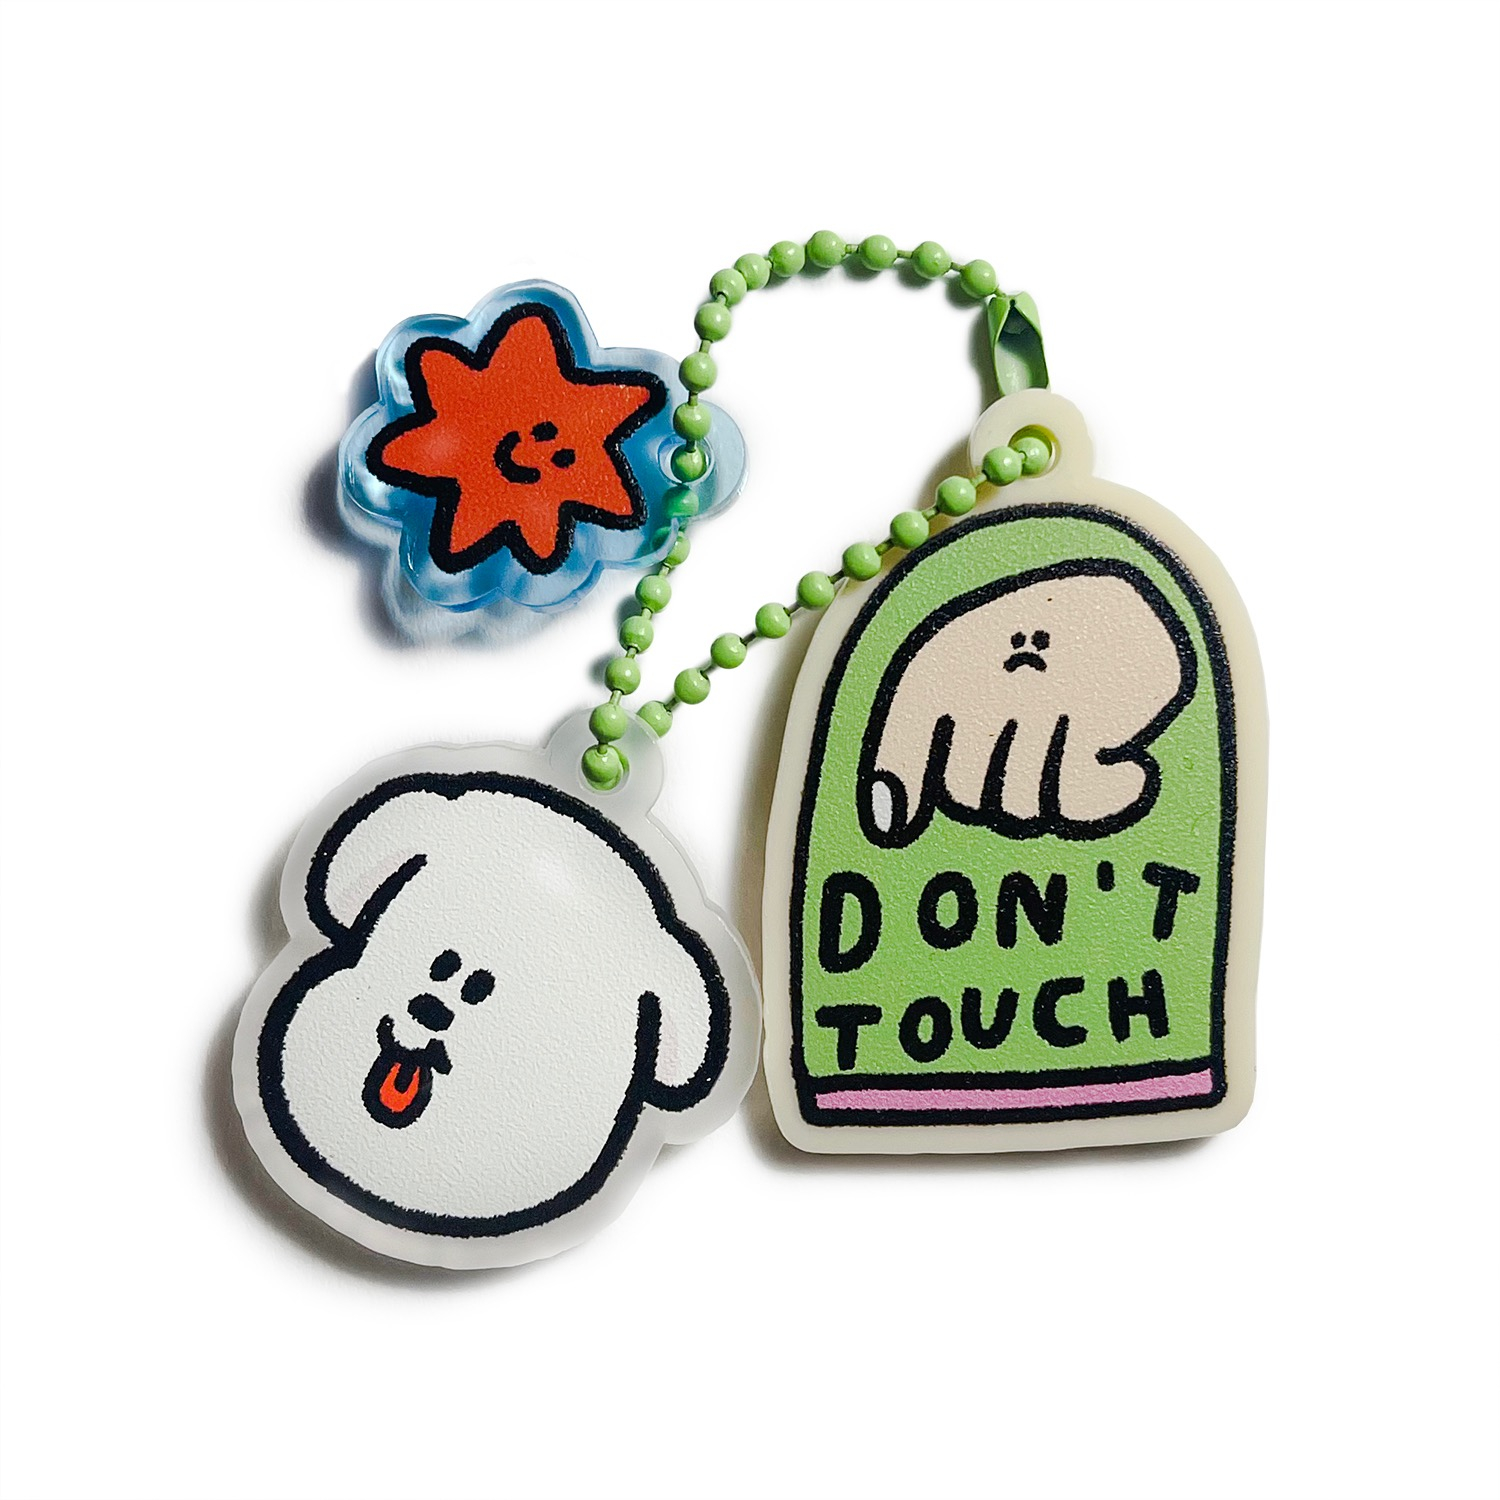 Keyring Set - don't touch